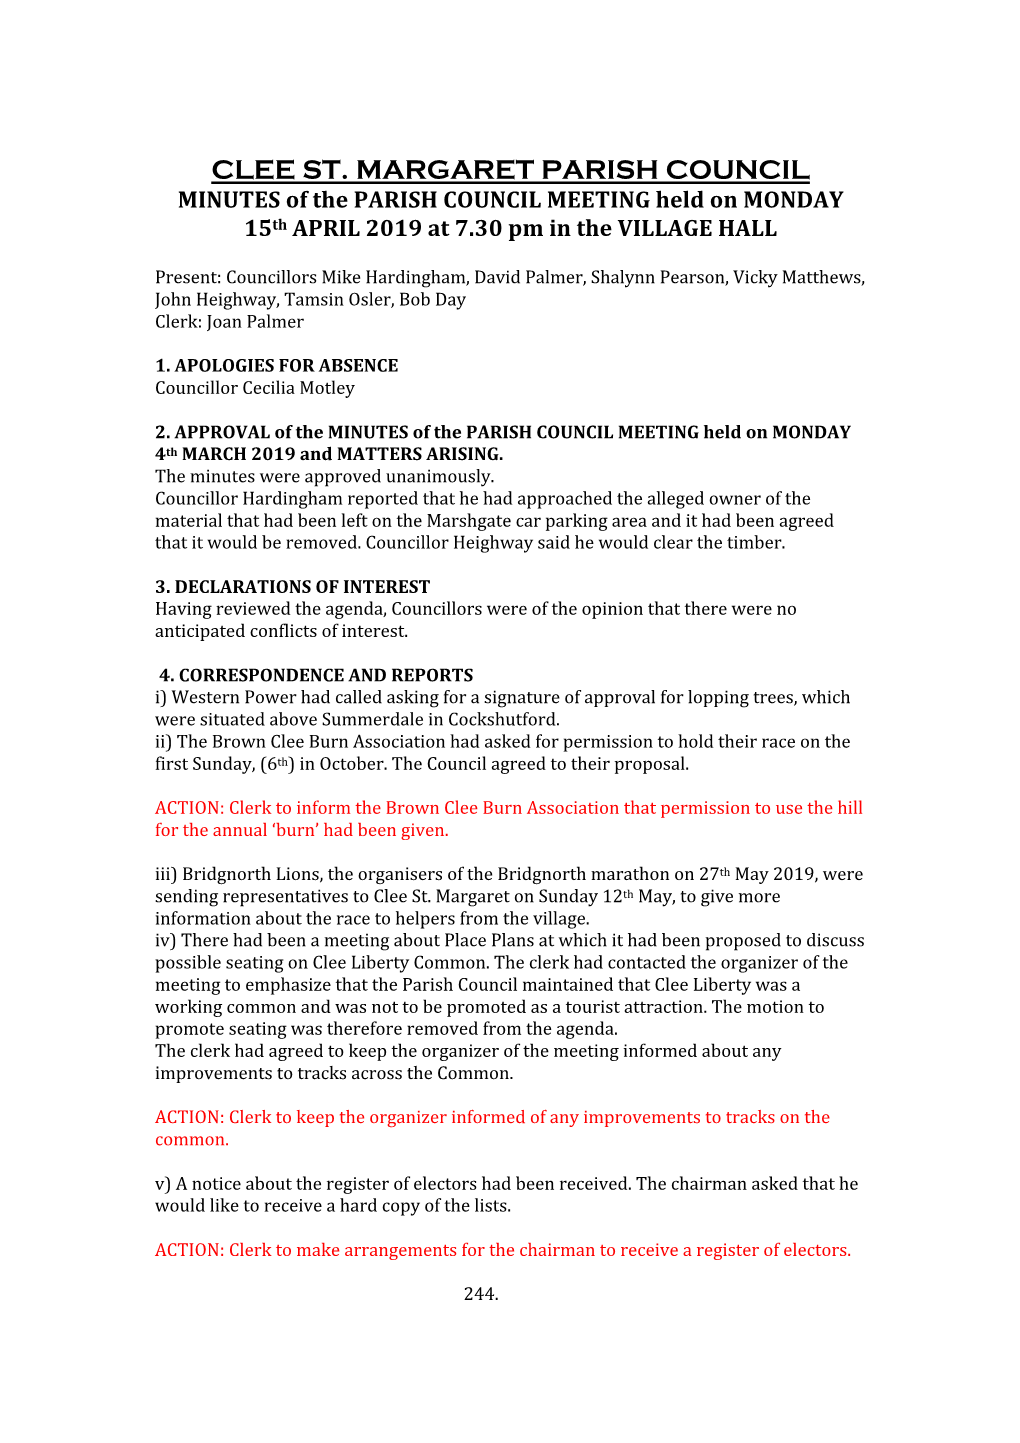 CLEE ST. MARGARET PARISH COUNCIL MINUTES of the PARISH COUNCIL MEETING Held on MONDAY 15Th APRIL 2019 at 7.30 Pm in the VILLAGE HALL